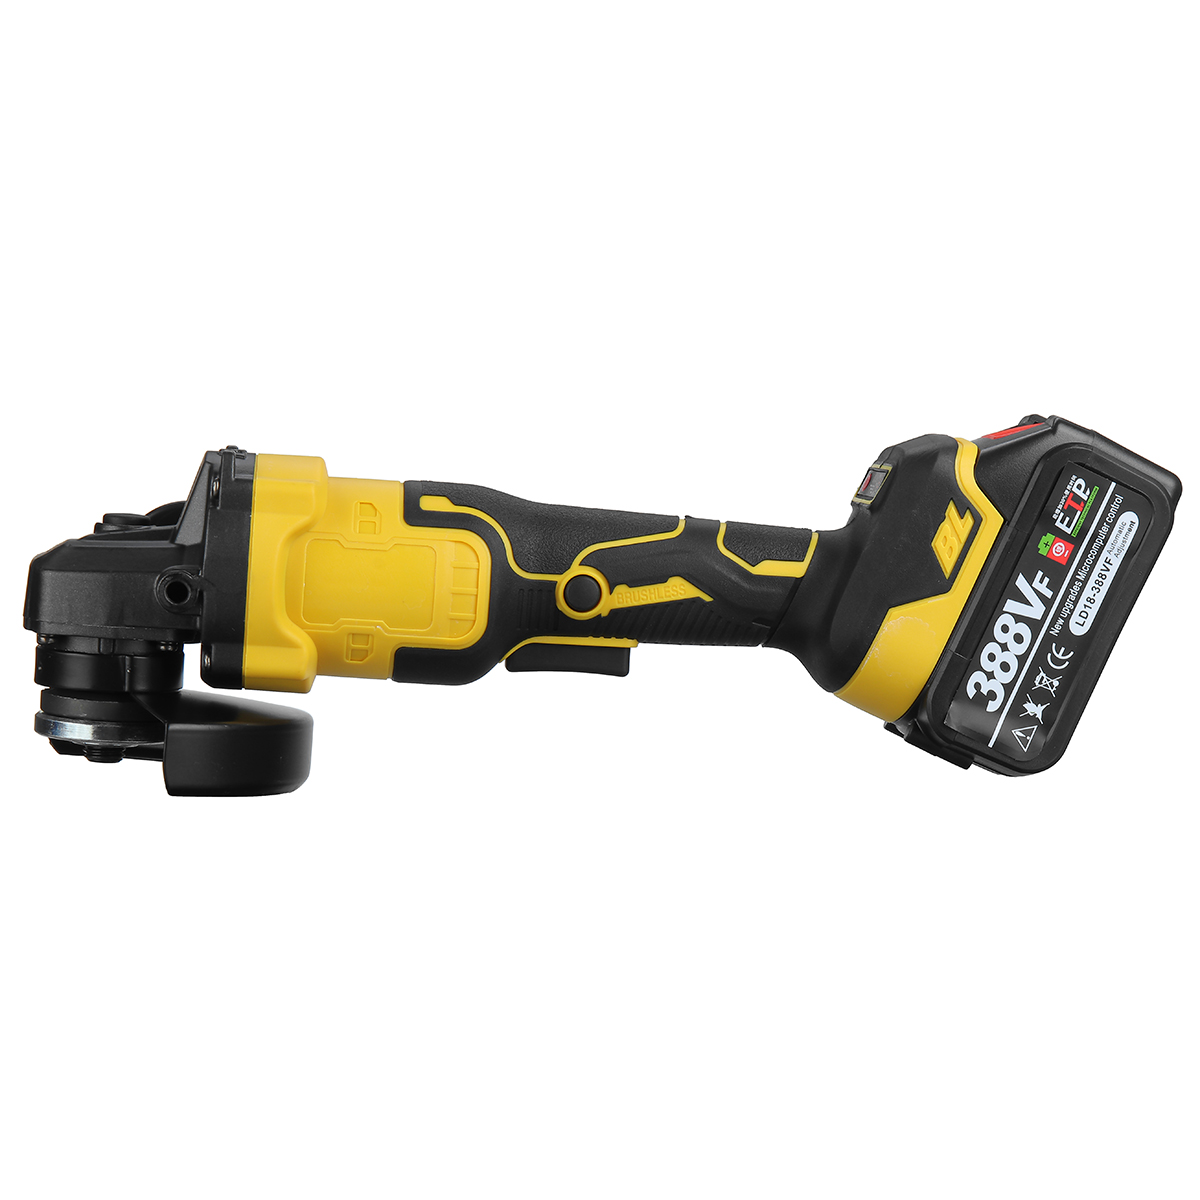 Drillpro-388VF-1280W-8500rpm-3-gears-125mm-Brushless-Lithium-Electric-Angle-Grinder-for-Makiita-18V--1962826-17